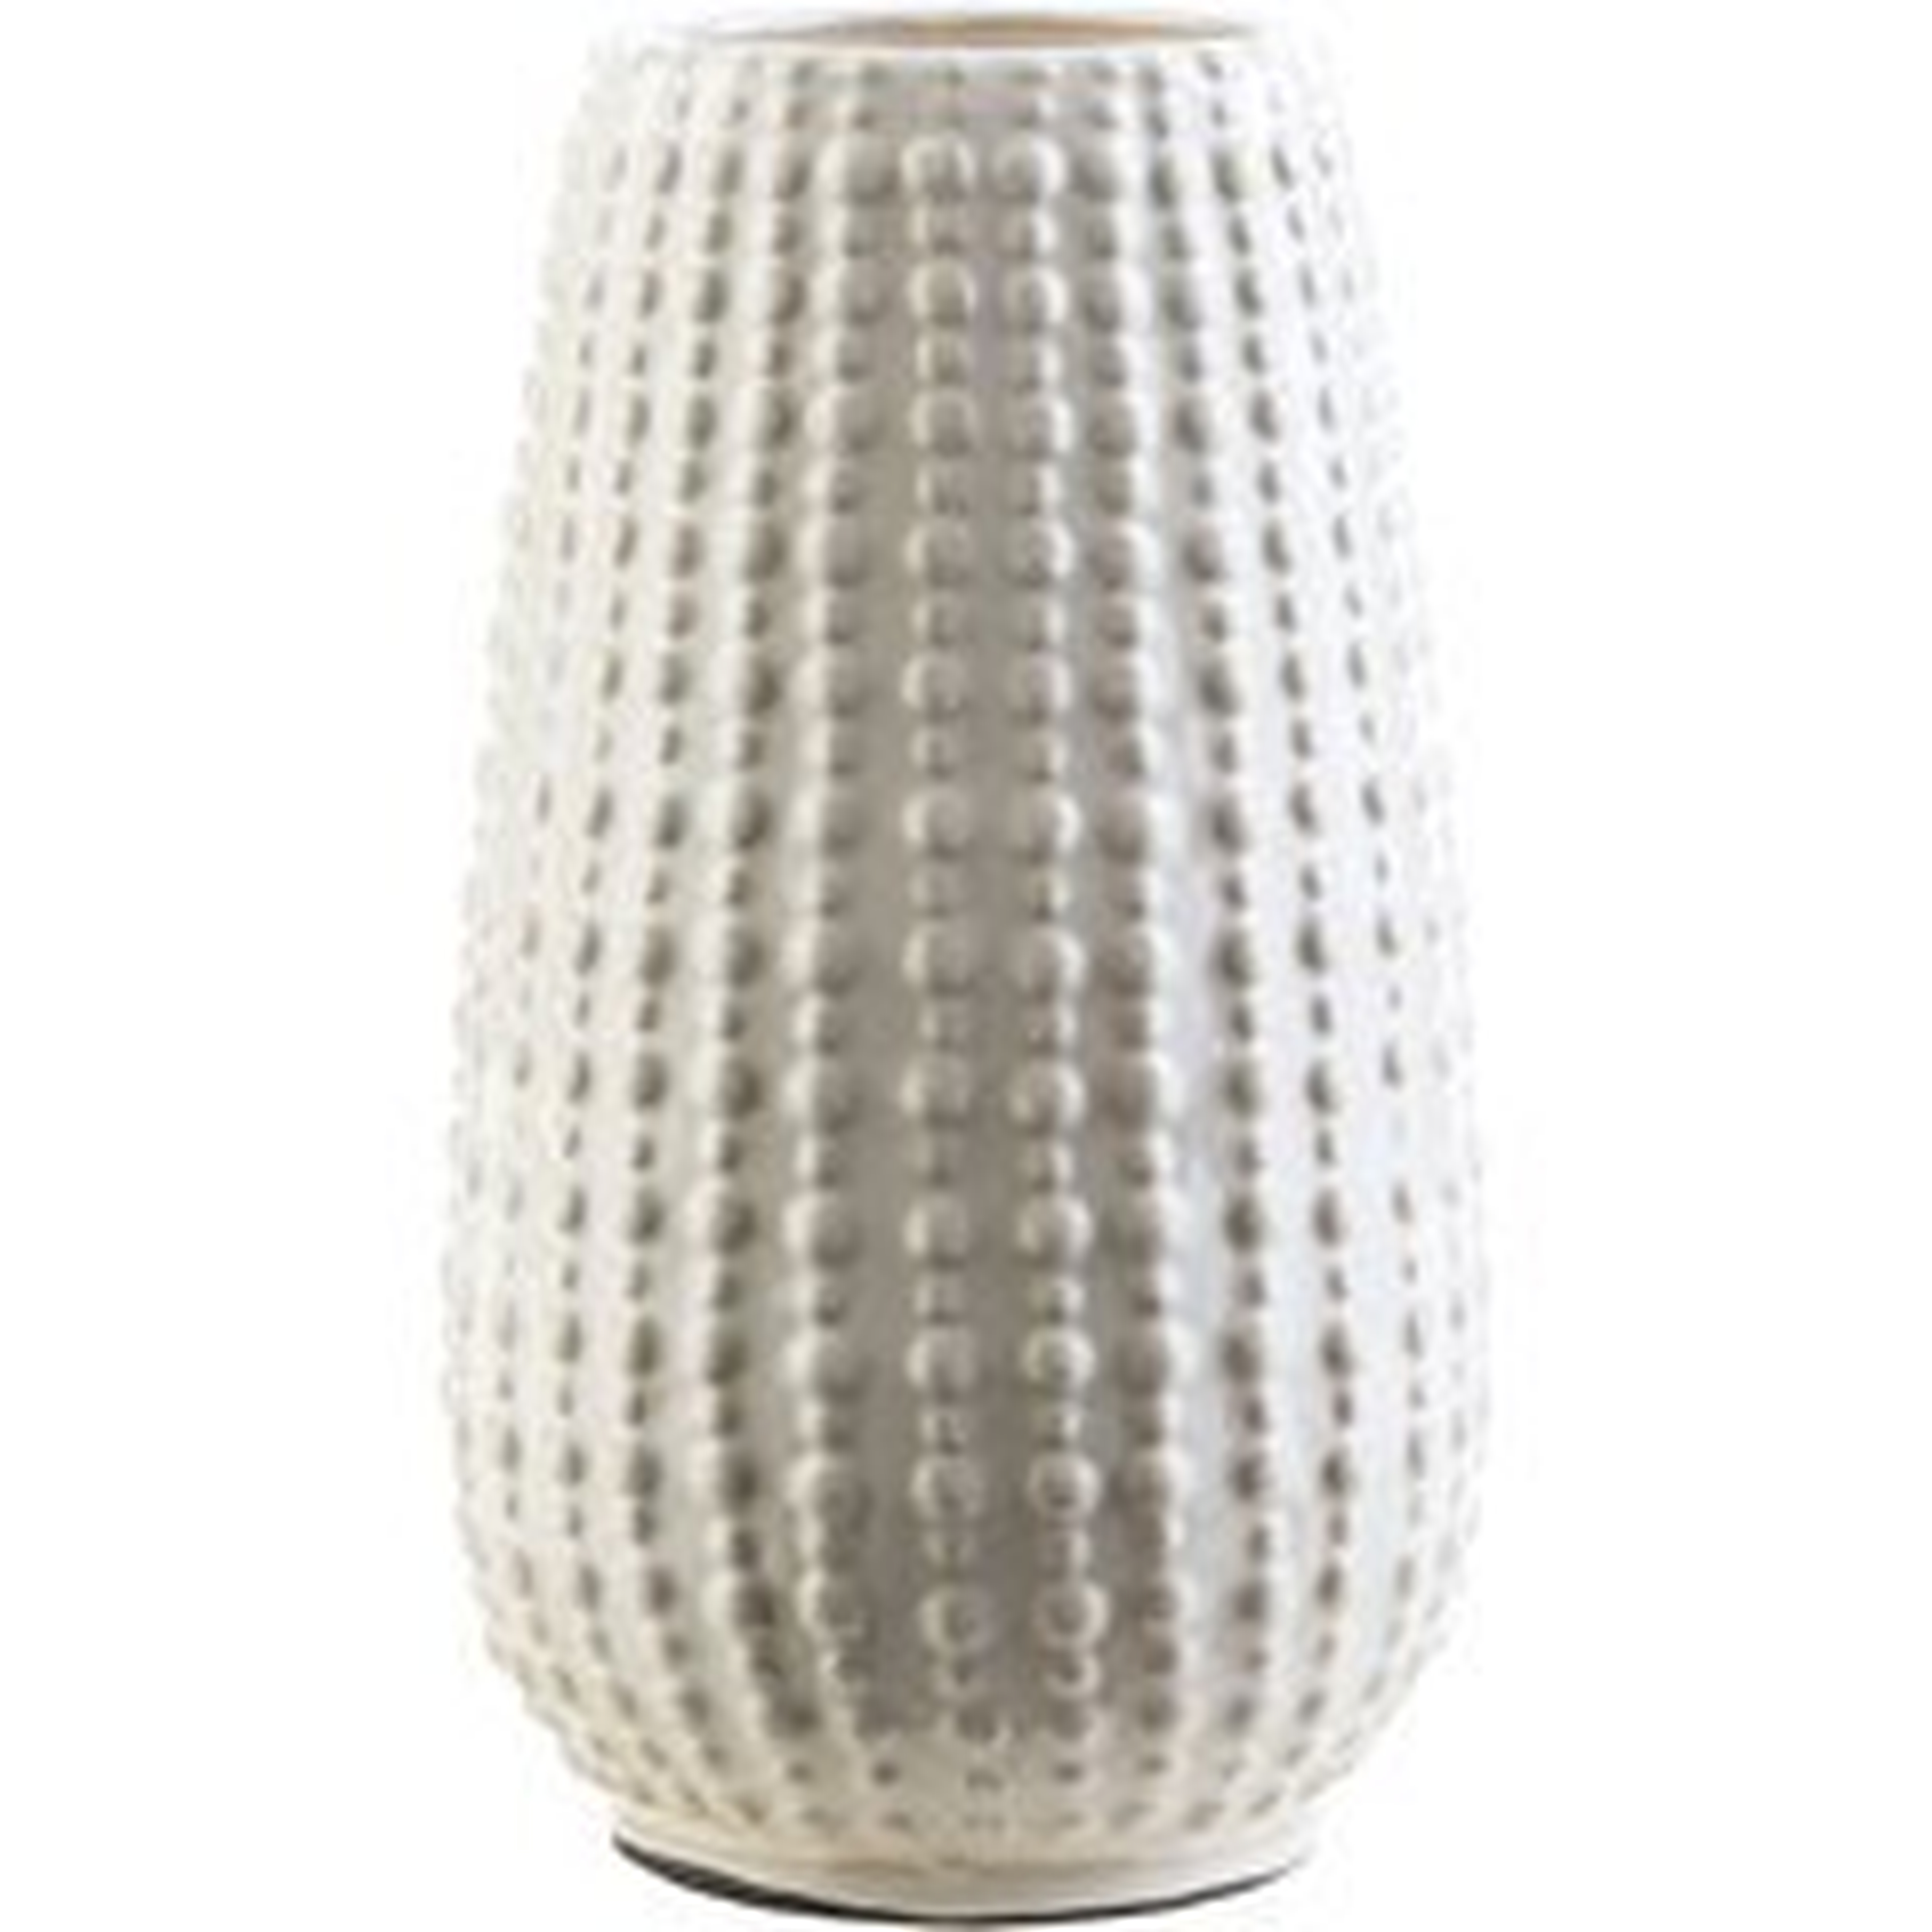 Clearwater 5.5" x 5.5" x 9.5" Table Vase - Surya